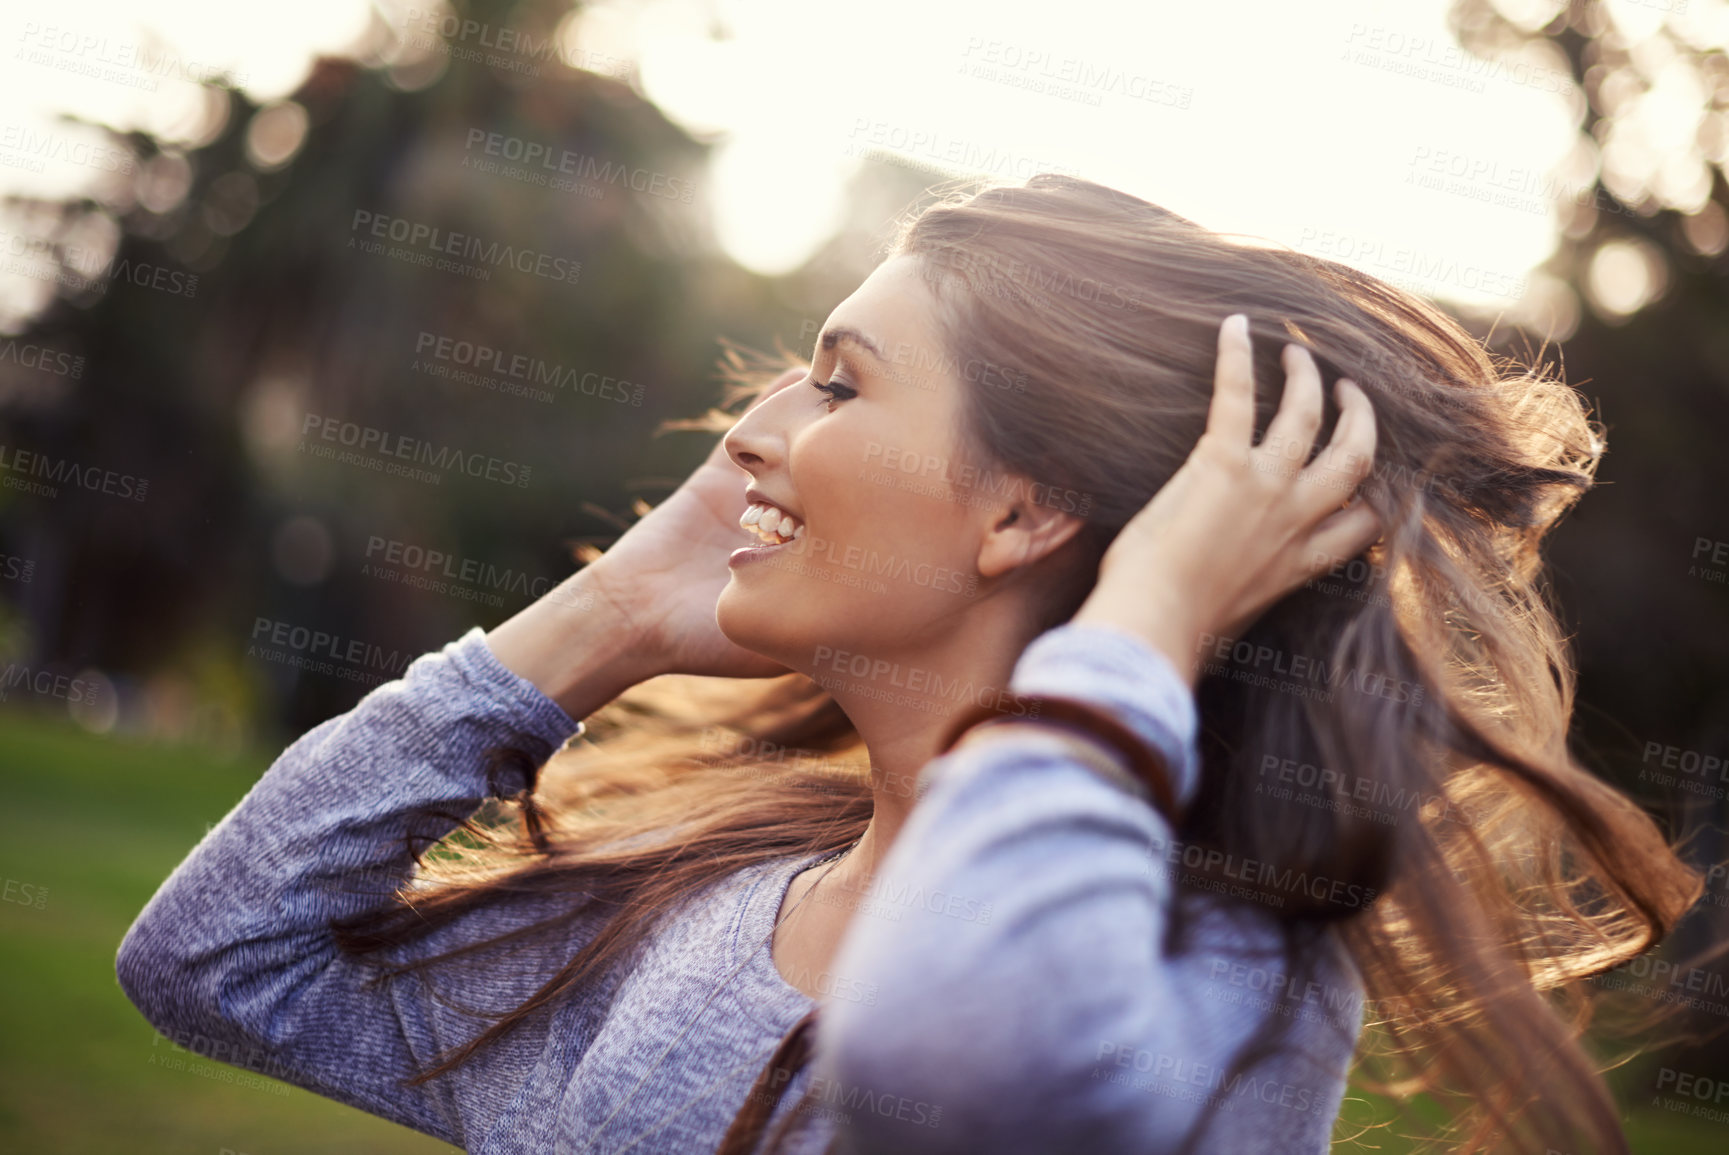 Buy stock photo A carefree young woman flinging her hair while outdoors